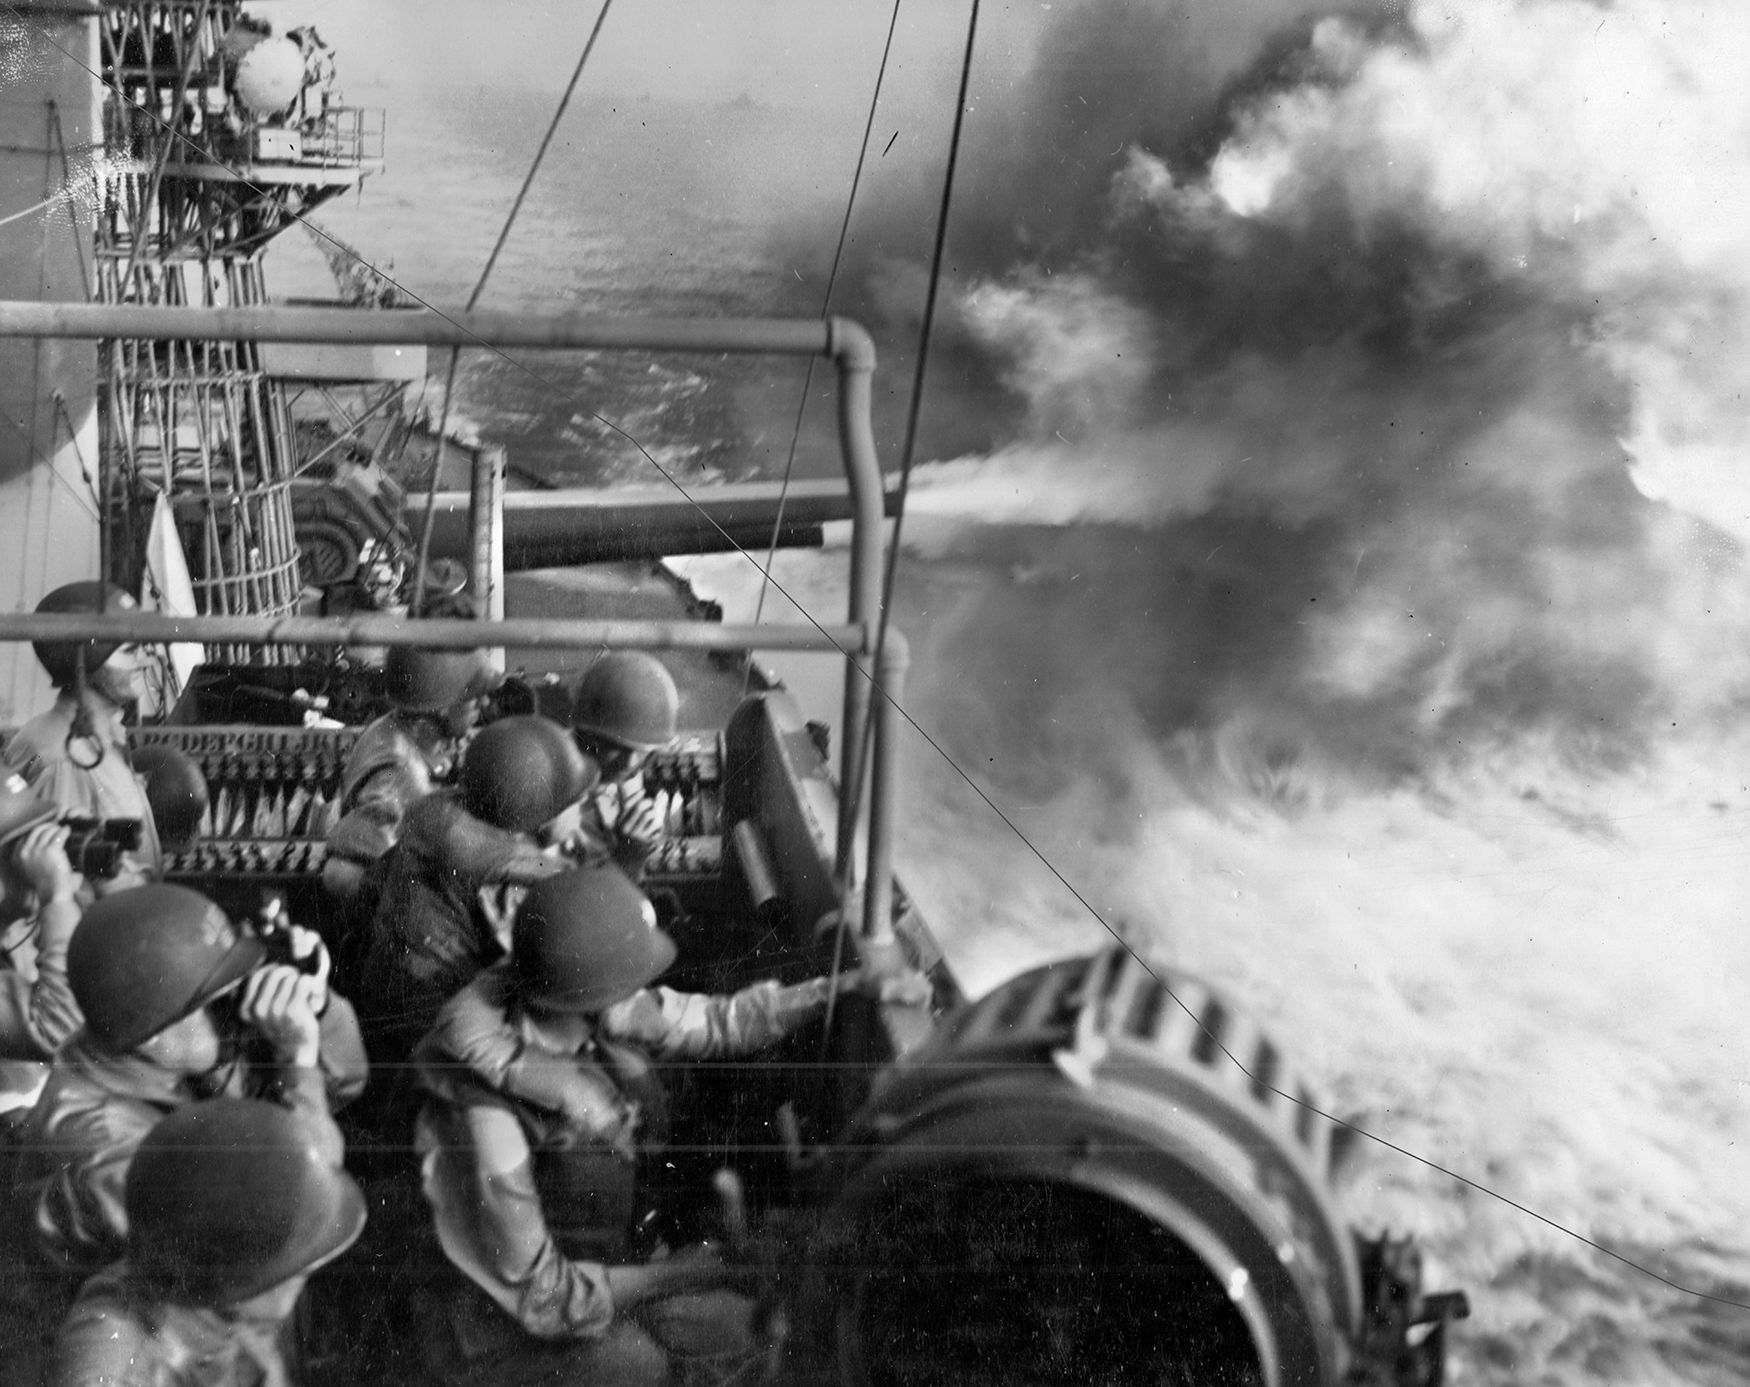 Rear Adm. Harry W. Hill (lower left) and his staff observe the pre-invasion bombardment from the 16- inch main guns of the cruiser USS Maryland, a survivor of Pearl Harbor. The well-dug-in defenders shrugged off the heavy shelling and came out fighting. 